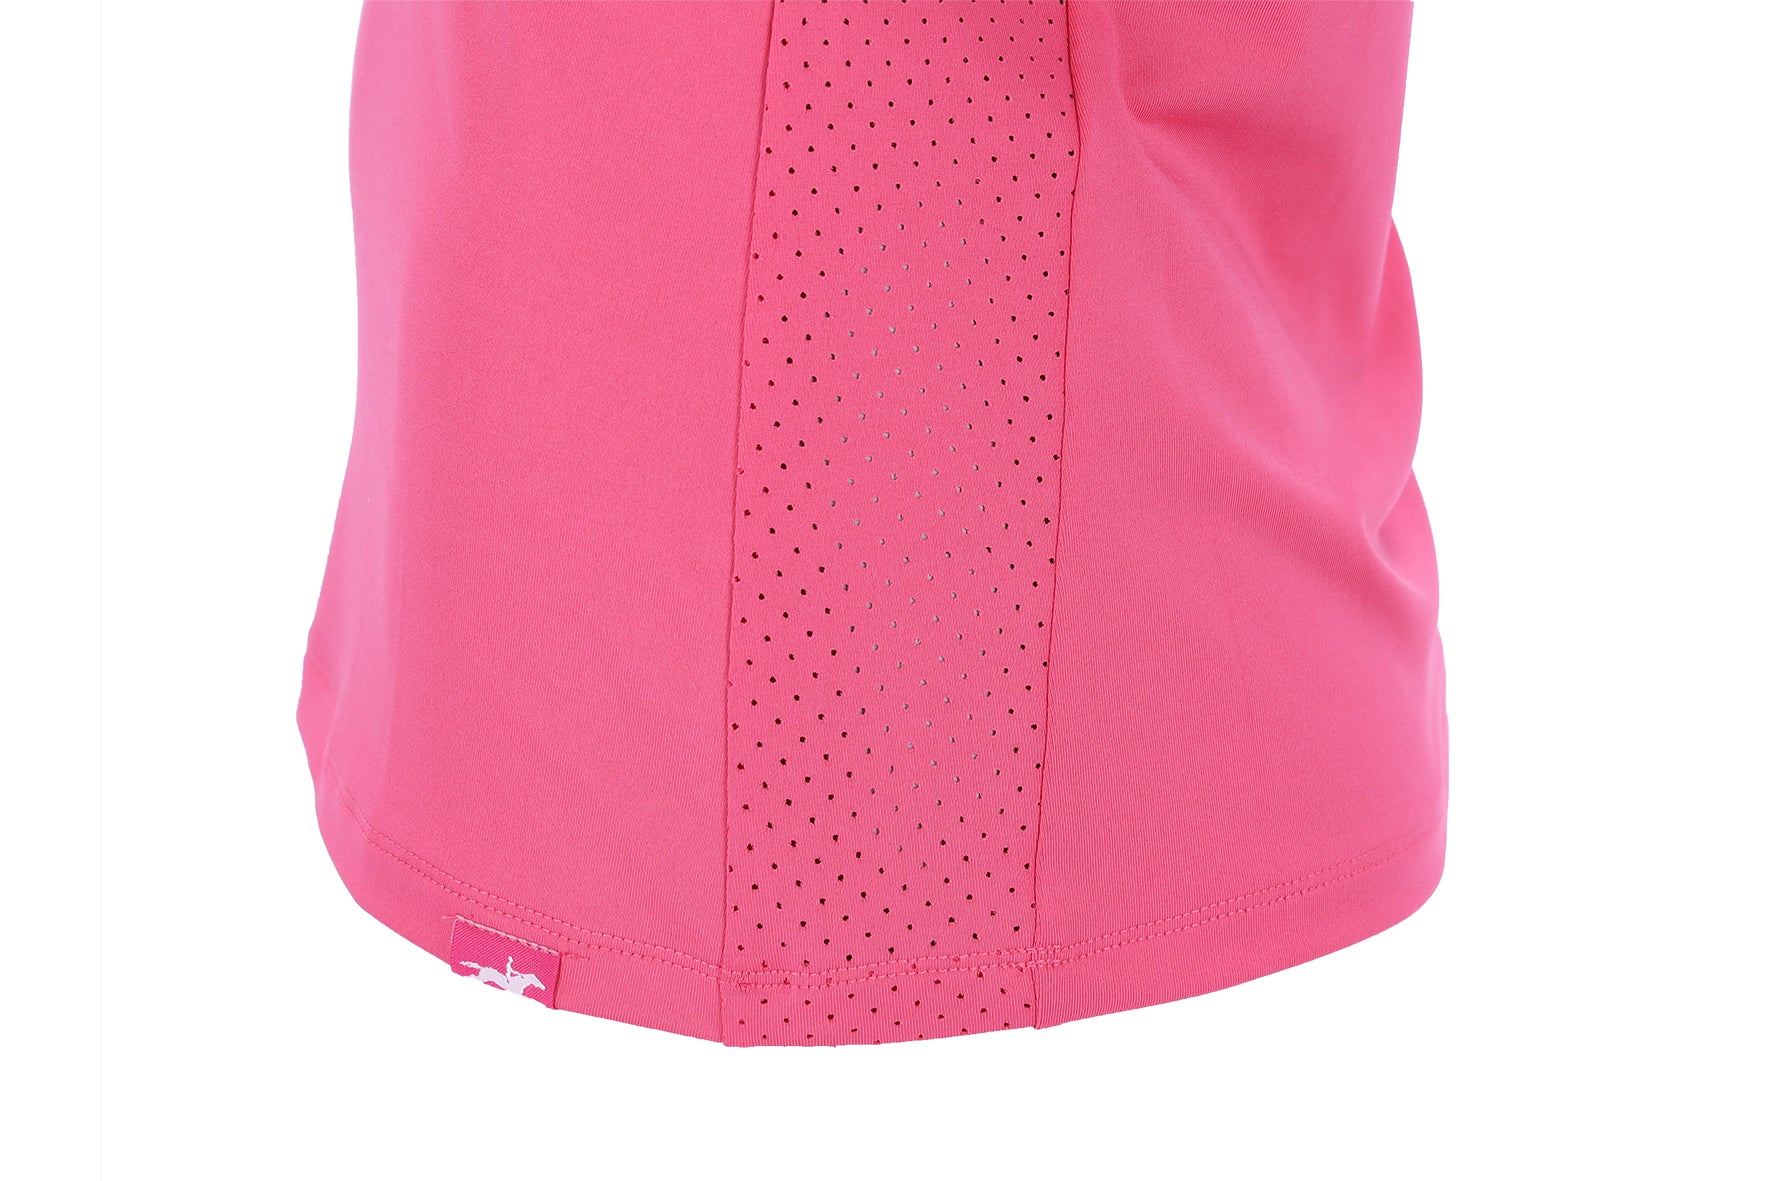 Womens Summer Page Style Functional Shirt Hot Pink